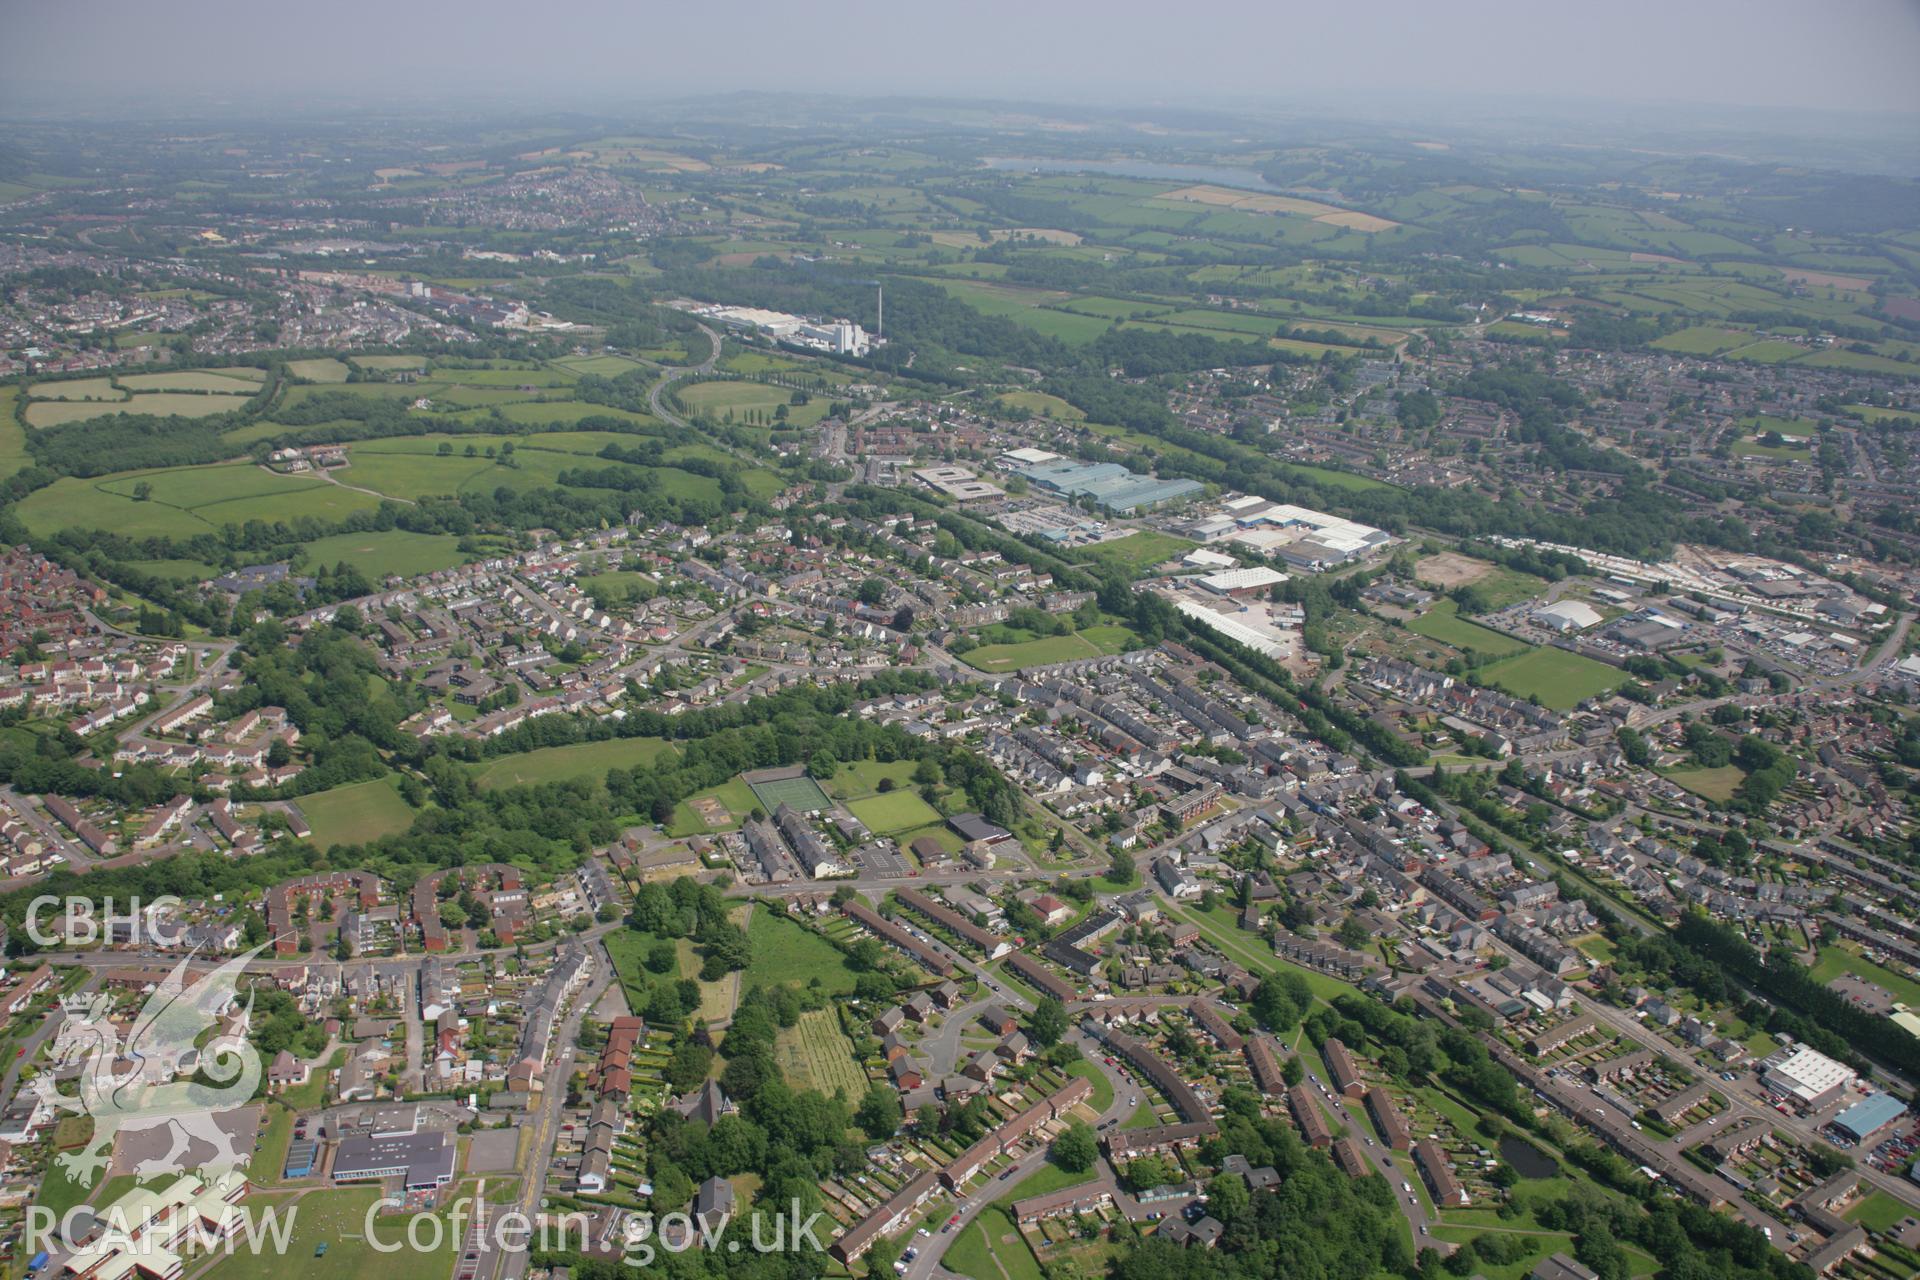 RCAHMW colour oblique aerial photograph of Cwmbran, including Pontnewydd, from the south-west. Taken on 09 June 2006 by Toby Driver.